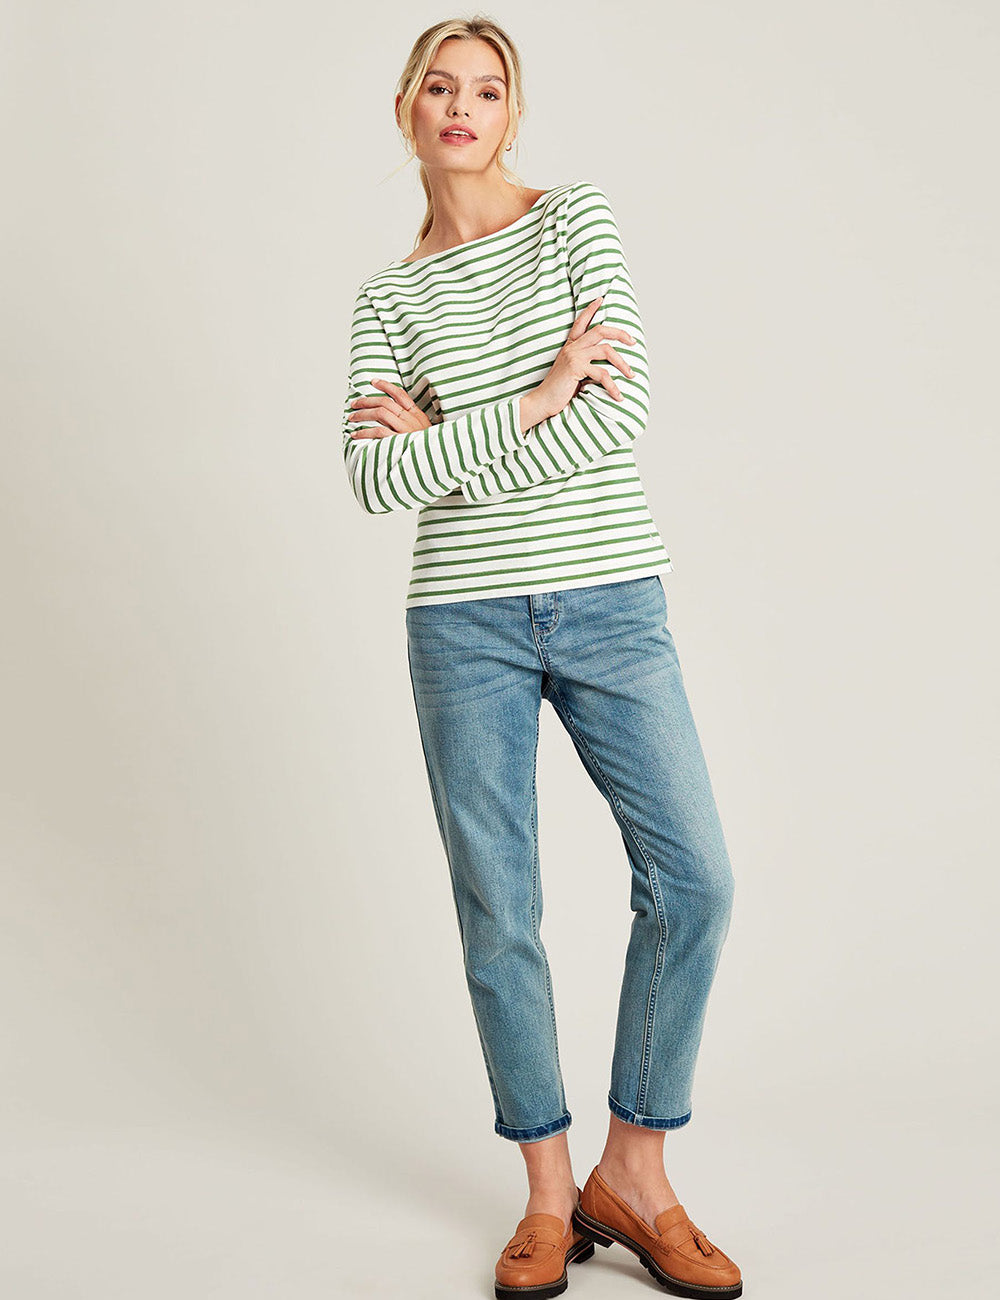 Joules Harbour Long Sleeve Top - Green Stripe